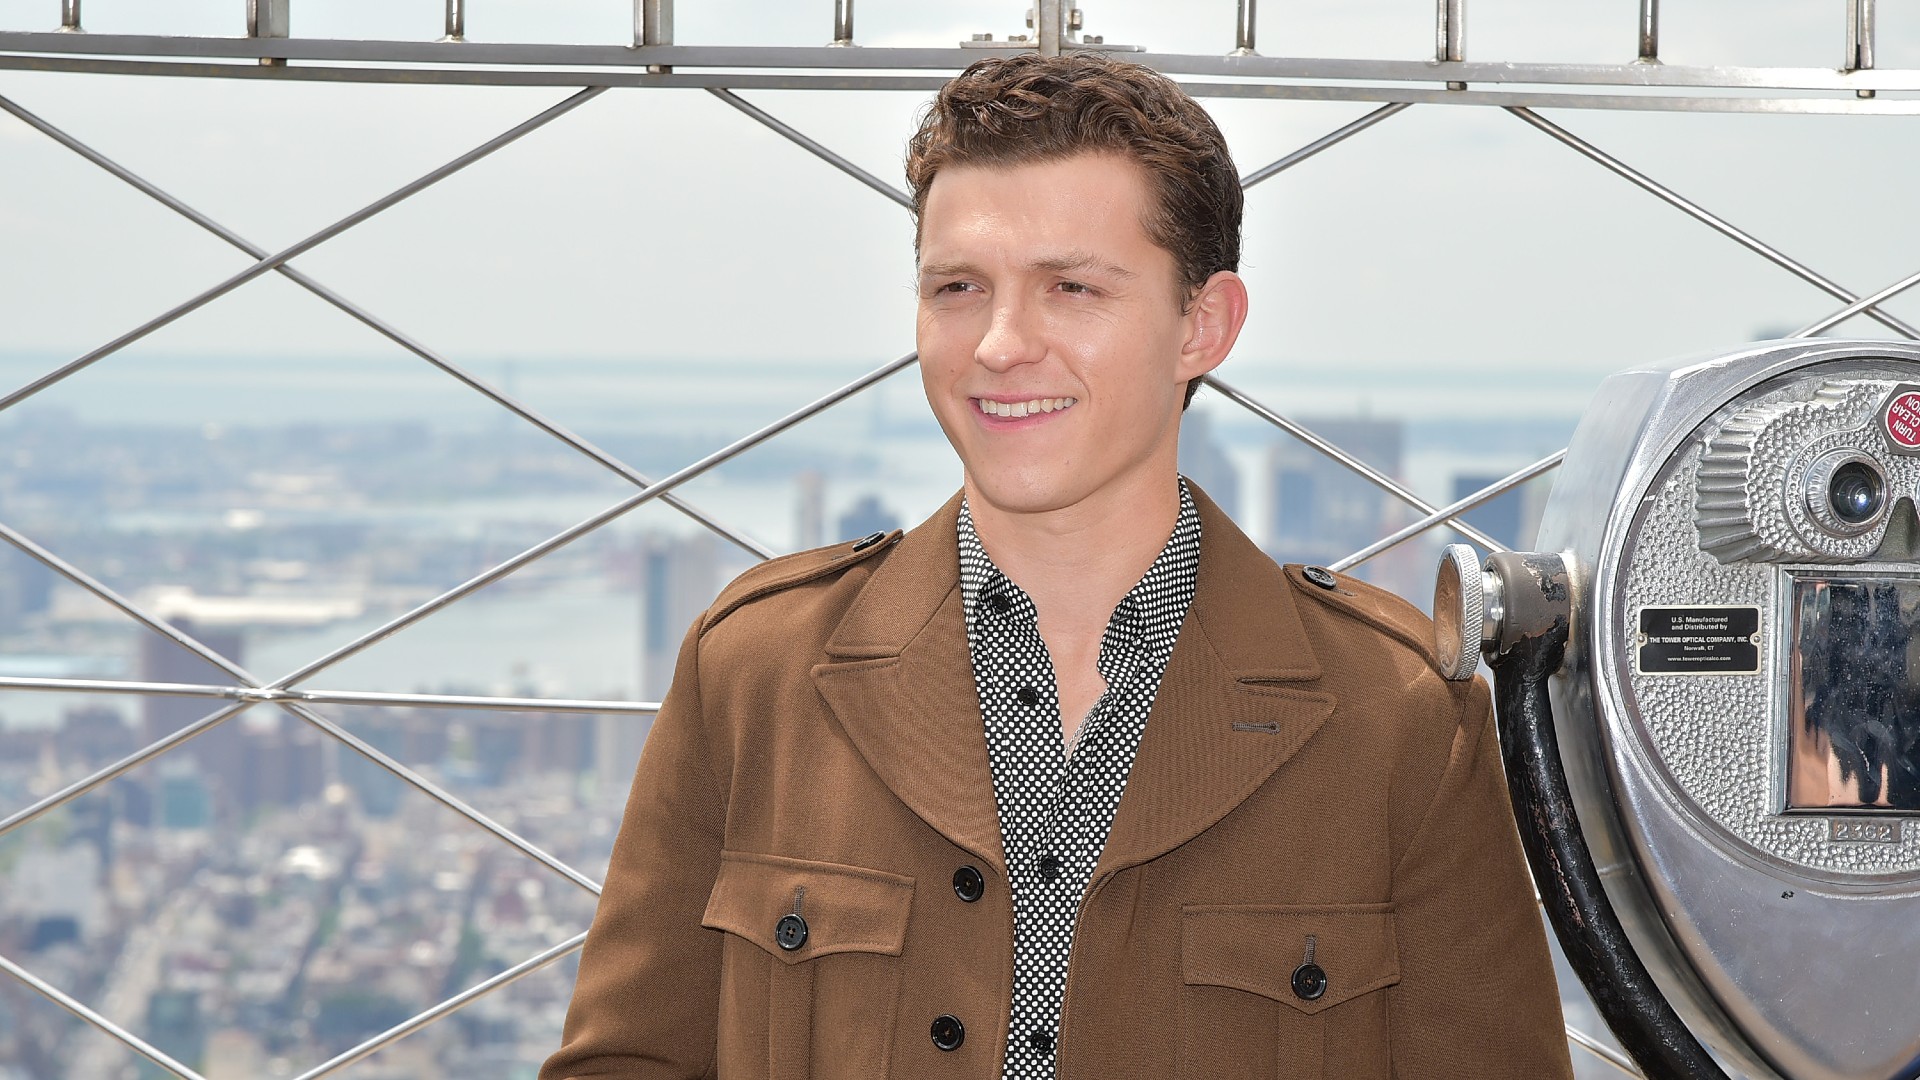 Casting News: Tom Holland to Star in Mental Illness Anthology Series 'The Crowded Room'